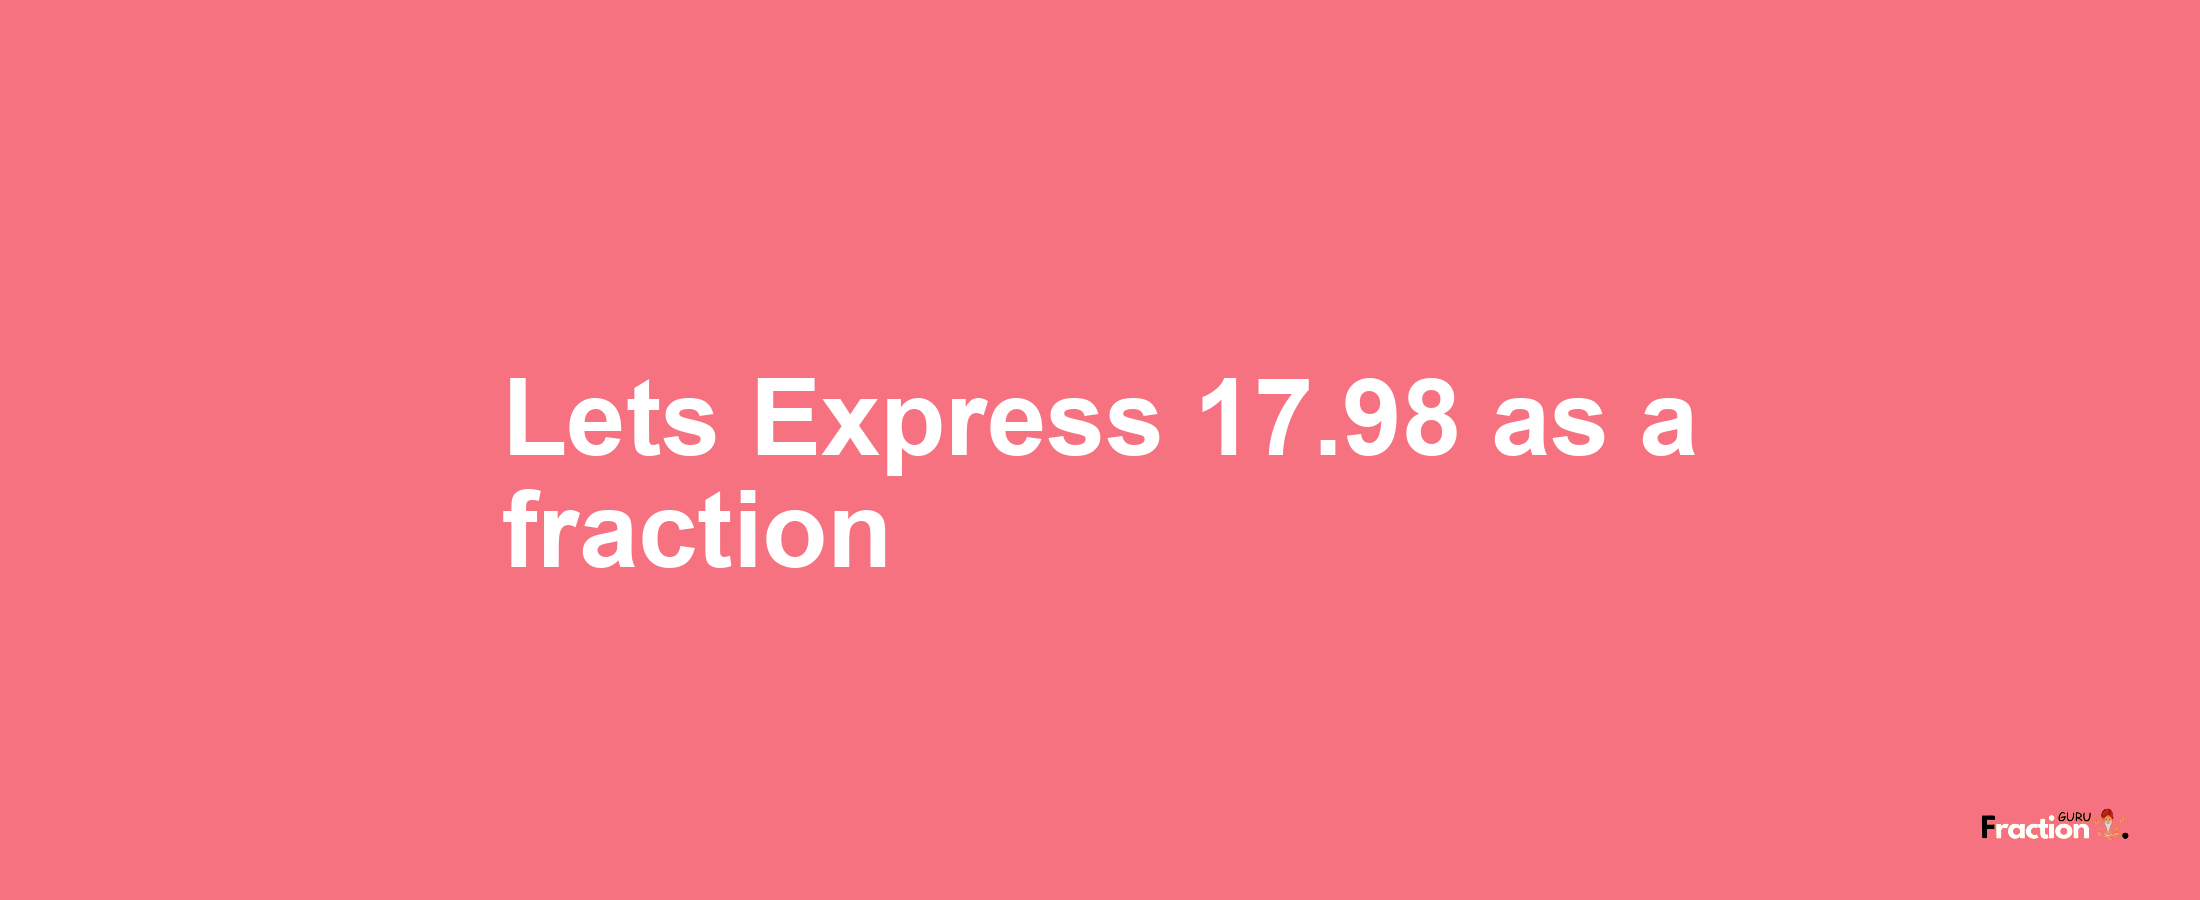 Lets Express 17.98 as afraction